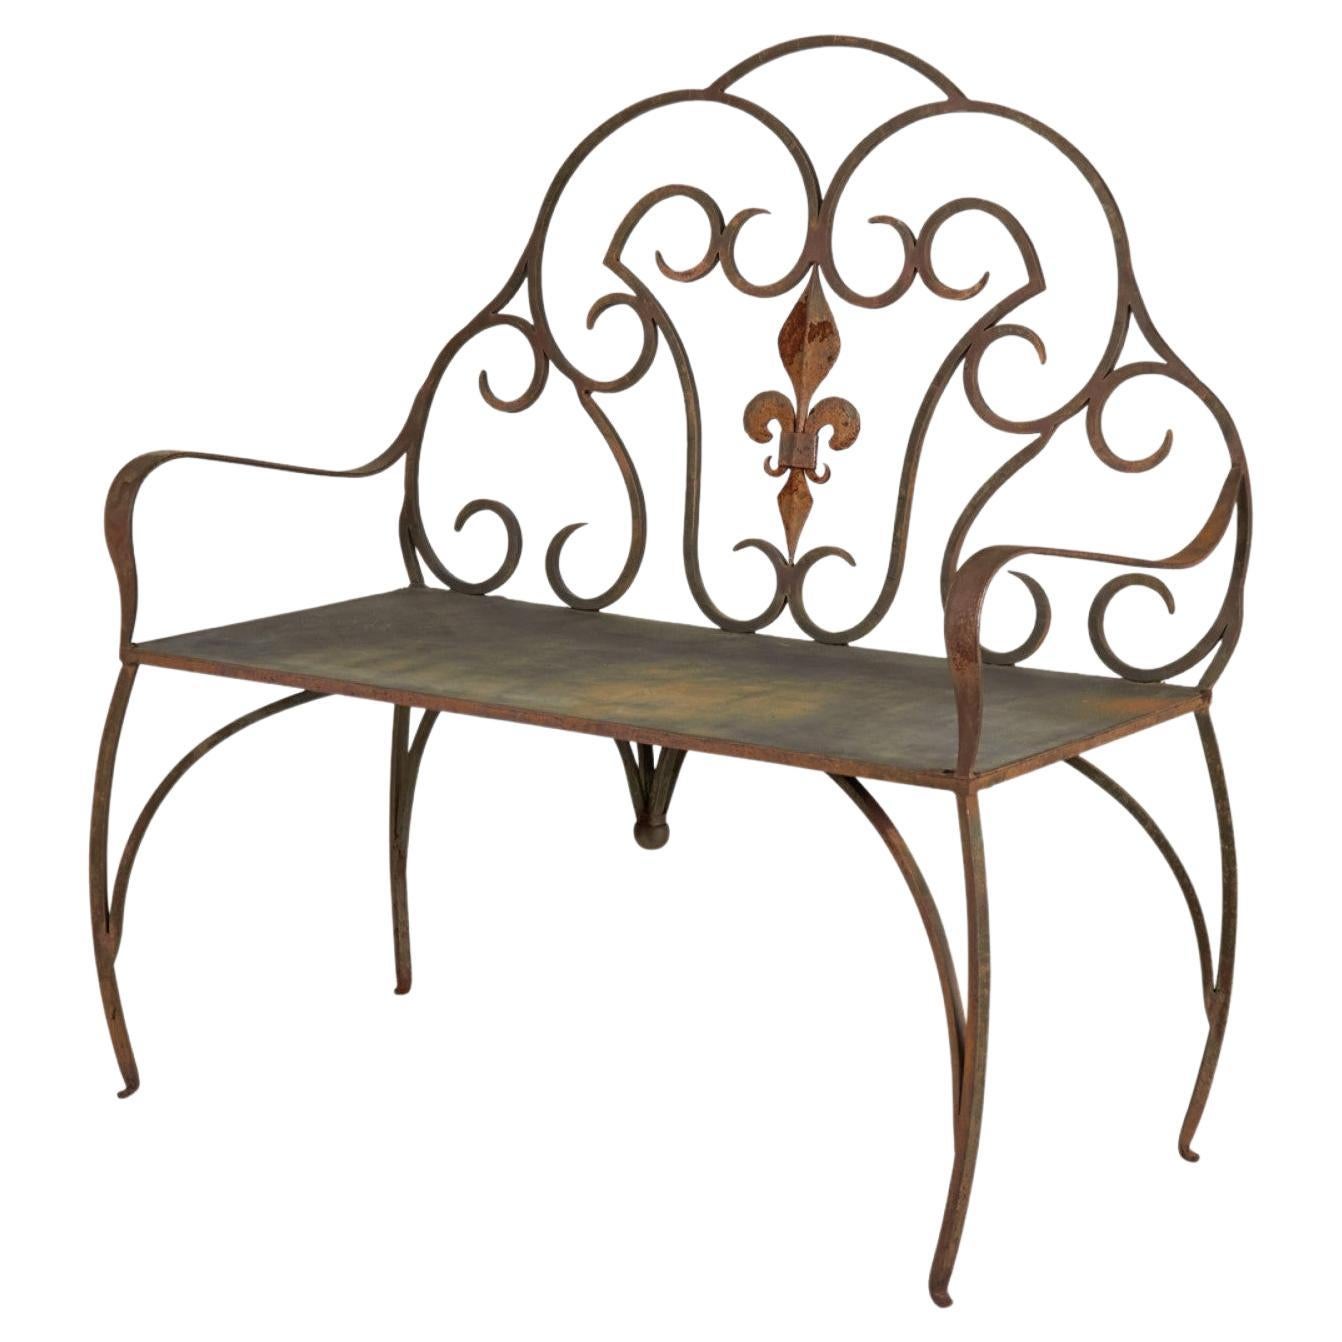 Jan Barboglio Mexican Modern Style Wrought Iron Outdoor Fleur de Lis Crest Bench For Sale